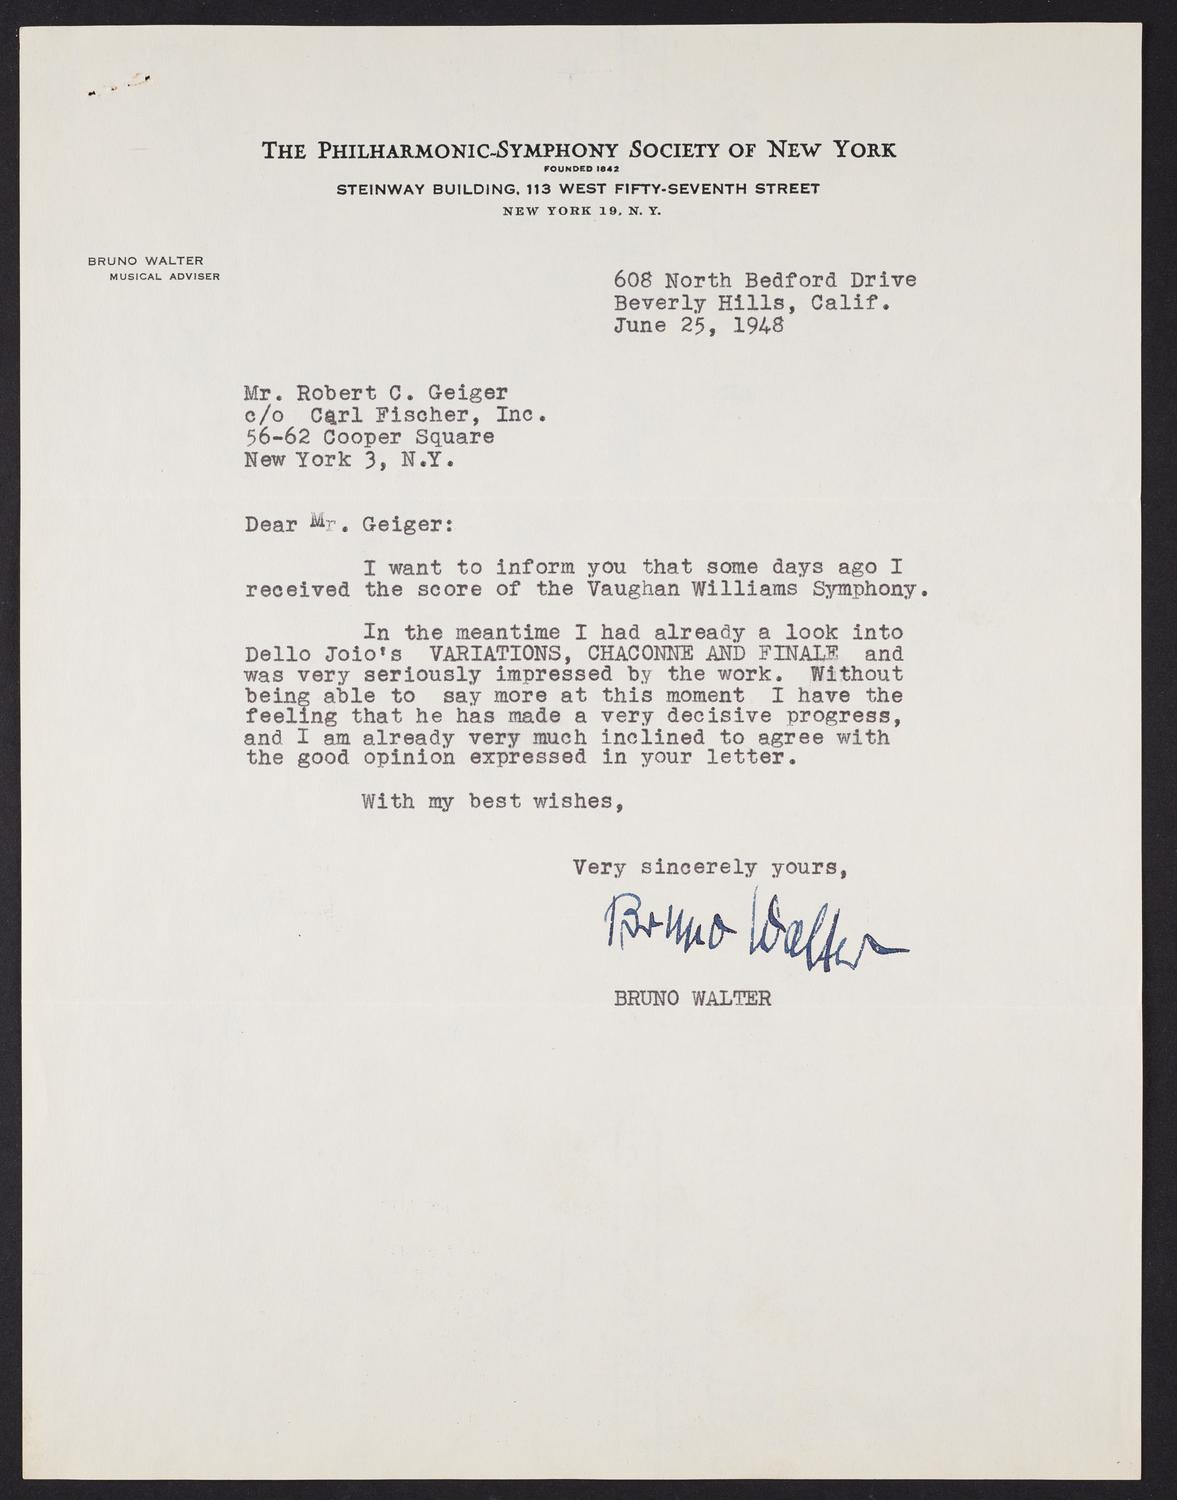 Correspondence from Bruno Walter to Robert Geiger, page 2 of 3